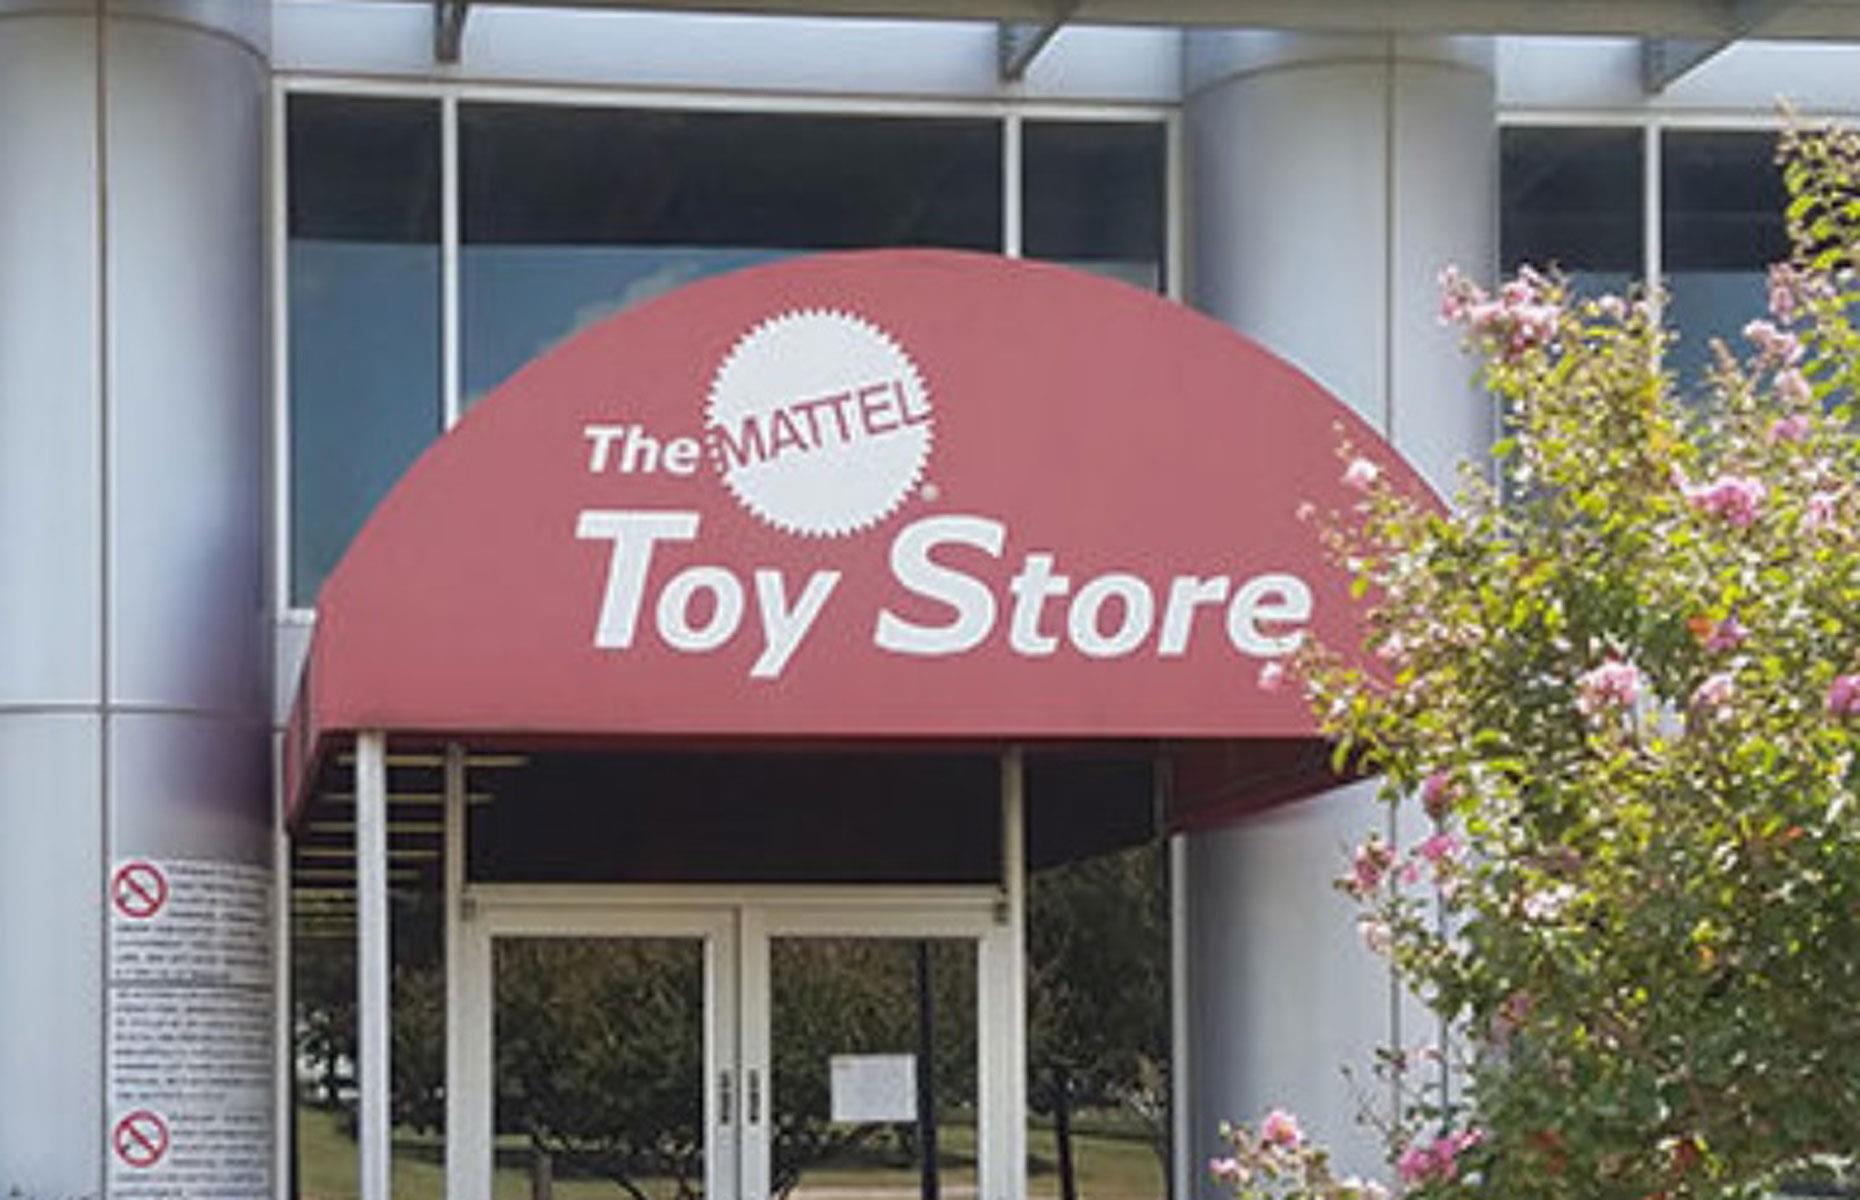 Mattel Toy Store: 4 stores